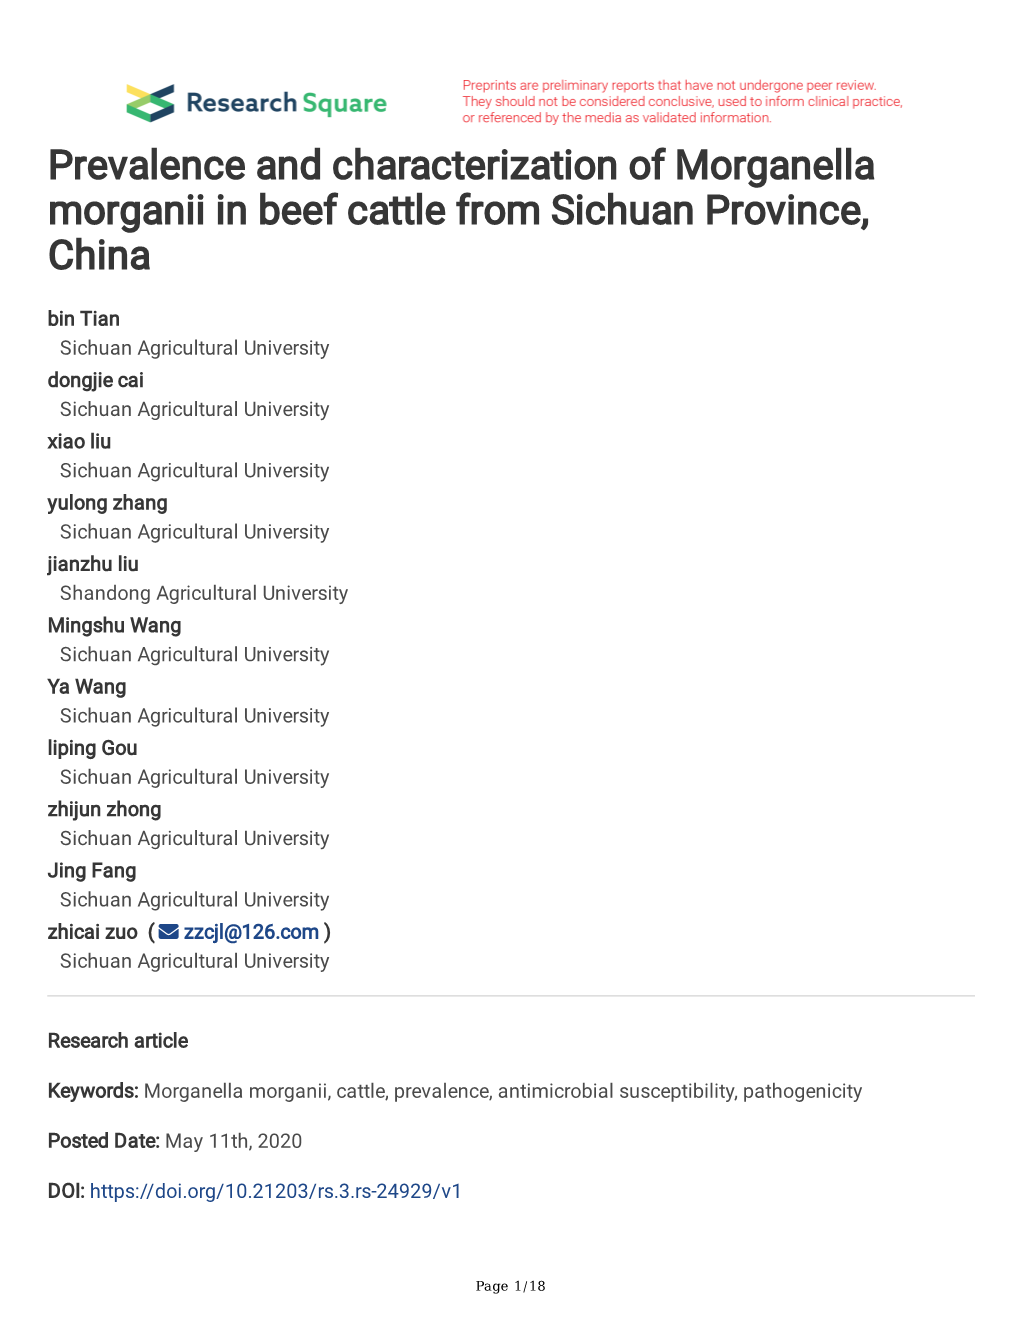 Prevalence and Characterization of Morganella Morganii in Beef Cattle